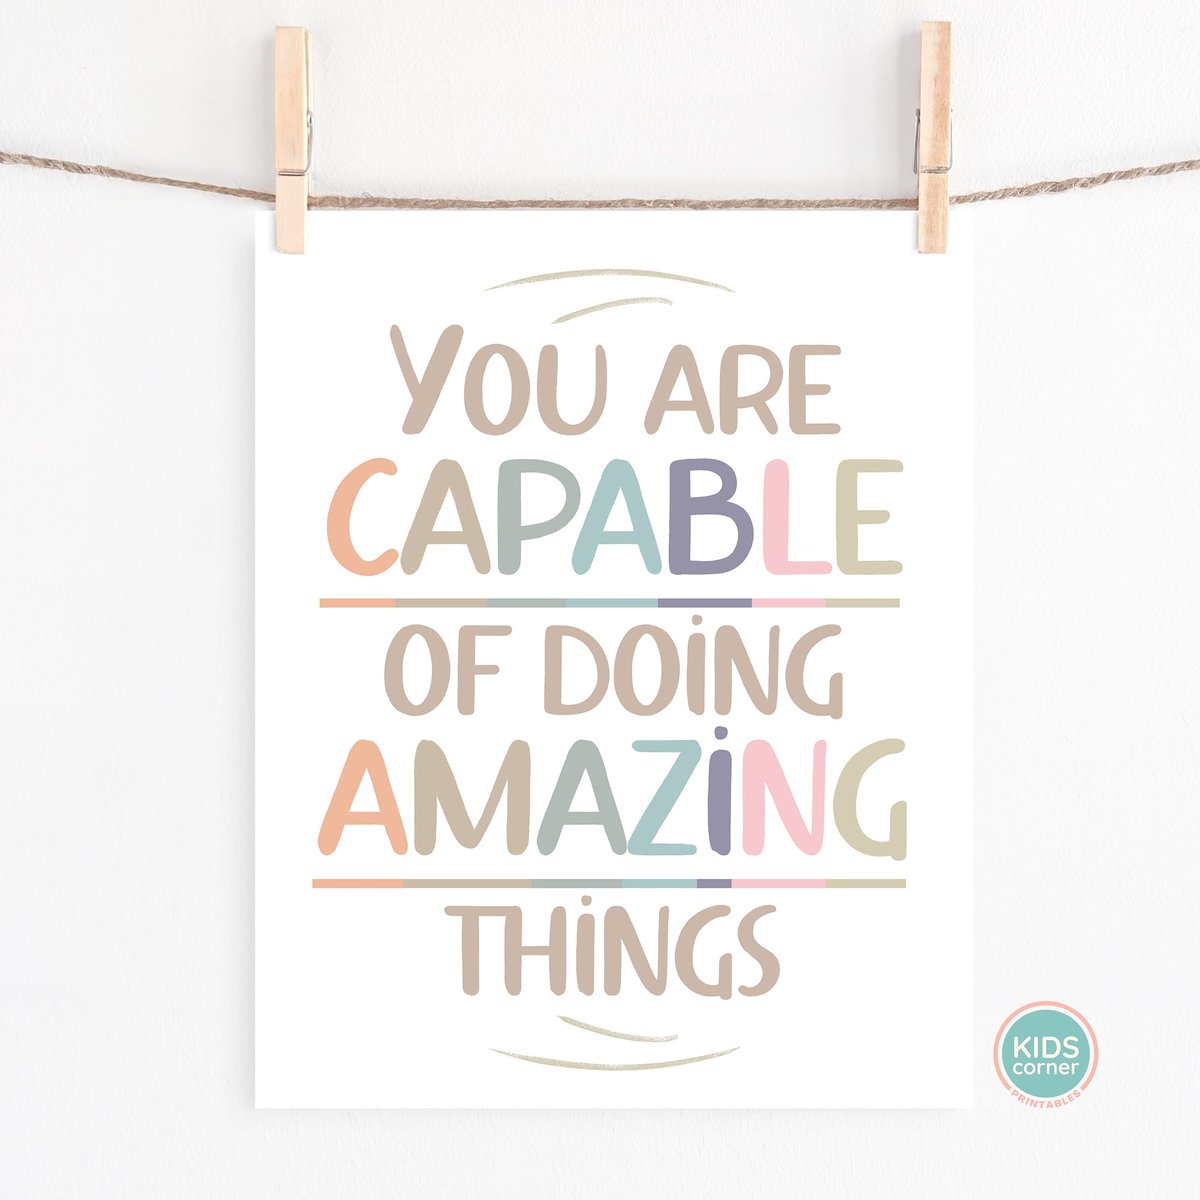 You are capable. You are amazing. You are capable of doing amazing things. Yes, you! 
#youarecapable #capable #youarecapableofamazingthings #amazing #yesyou #yesyoucan #youarecapableofdoingamazingthings #youcandoanything #youcan #youcanandyouwill #kidscorner #kidscornerdecor